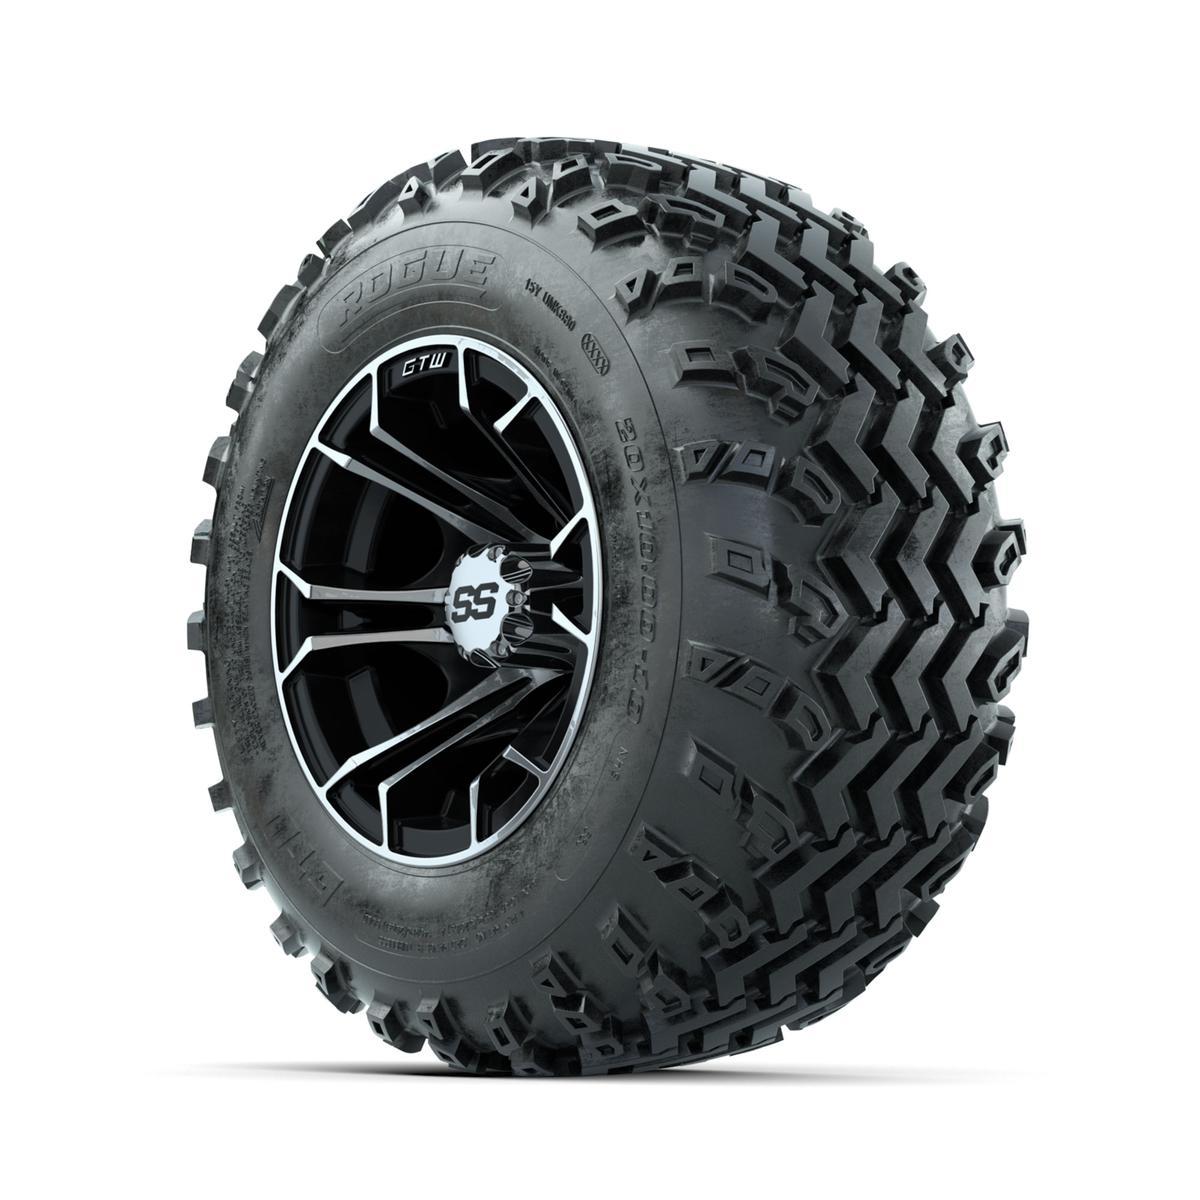 GTW Spyder Machined/Black 10 in Wheels with 20x10.00-10 Rogue All Terrain Tires – Full Set